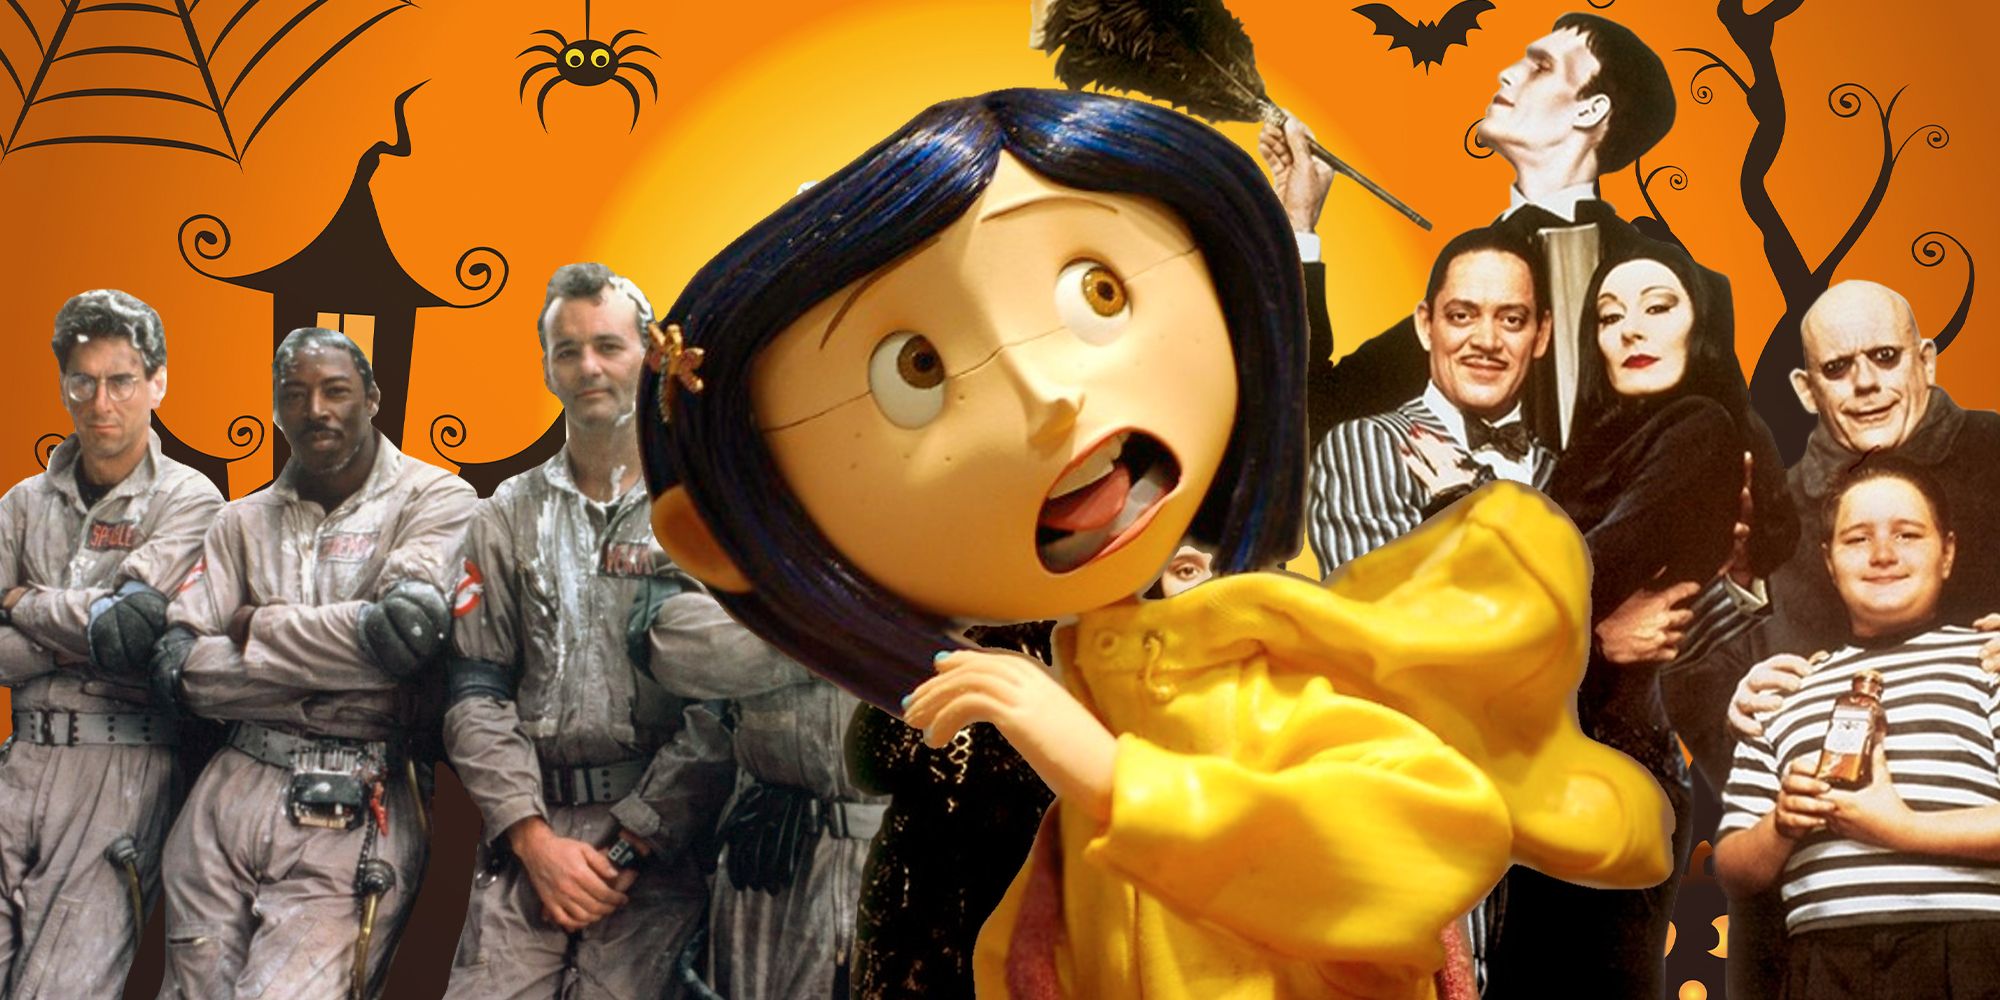 ghostbusters, coraline, and the addams family